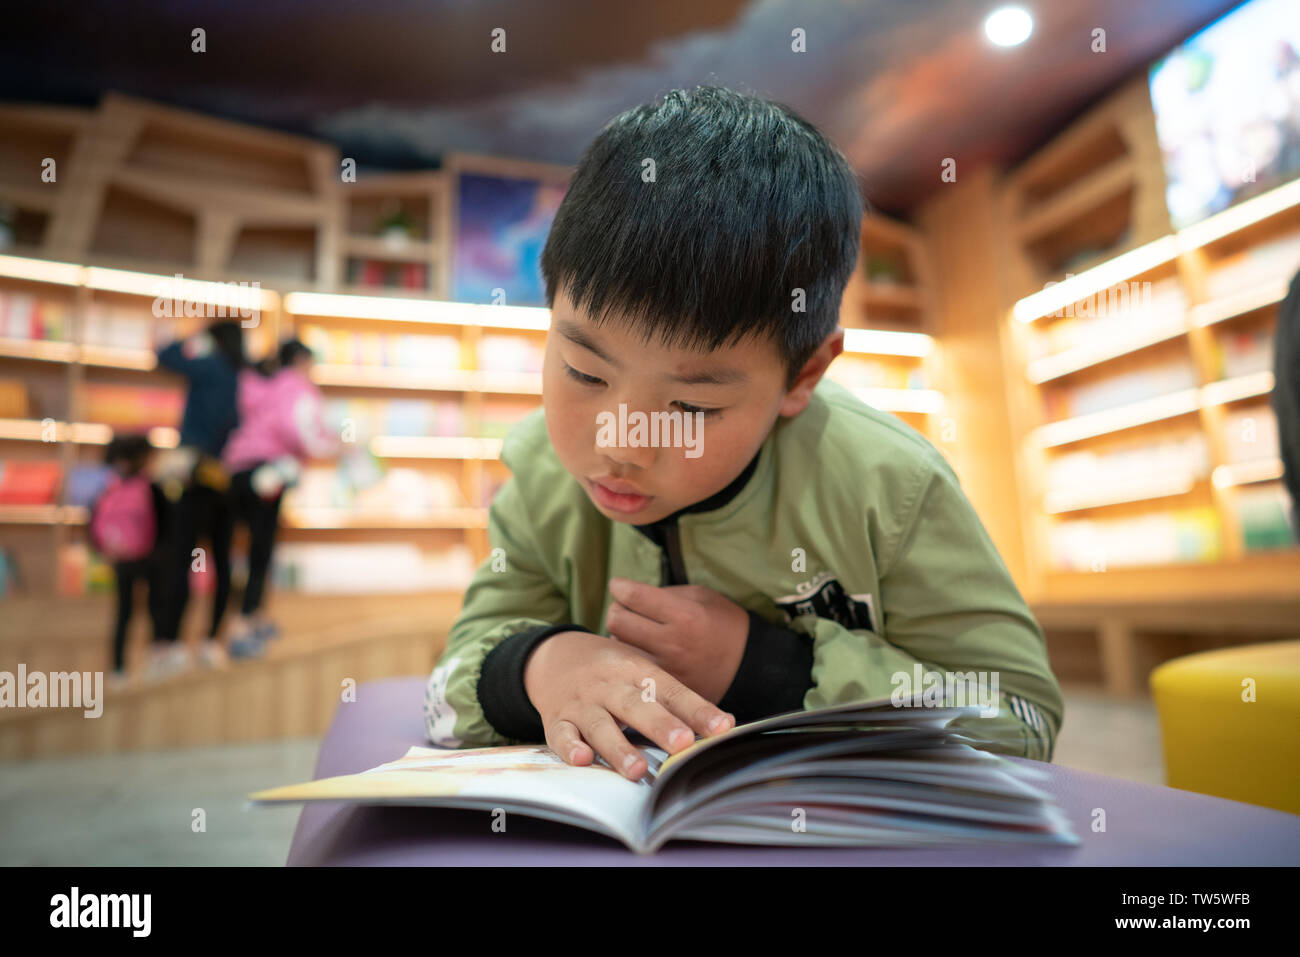 Filmed in the Xinhua Bookstore in Sihong County, Jiangsu Province on April 21, 2019, the spirit of serious learning made me press the shutter. They were too focused and did not find that I was filming them at all! Stock Photo